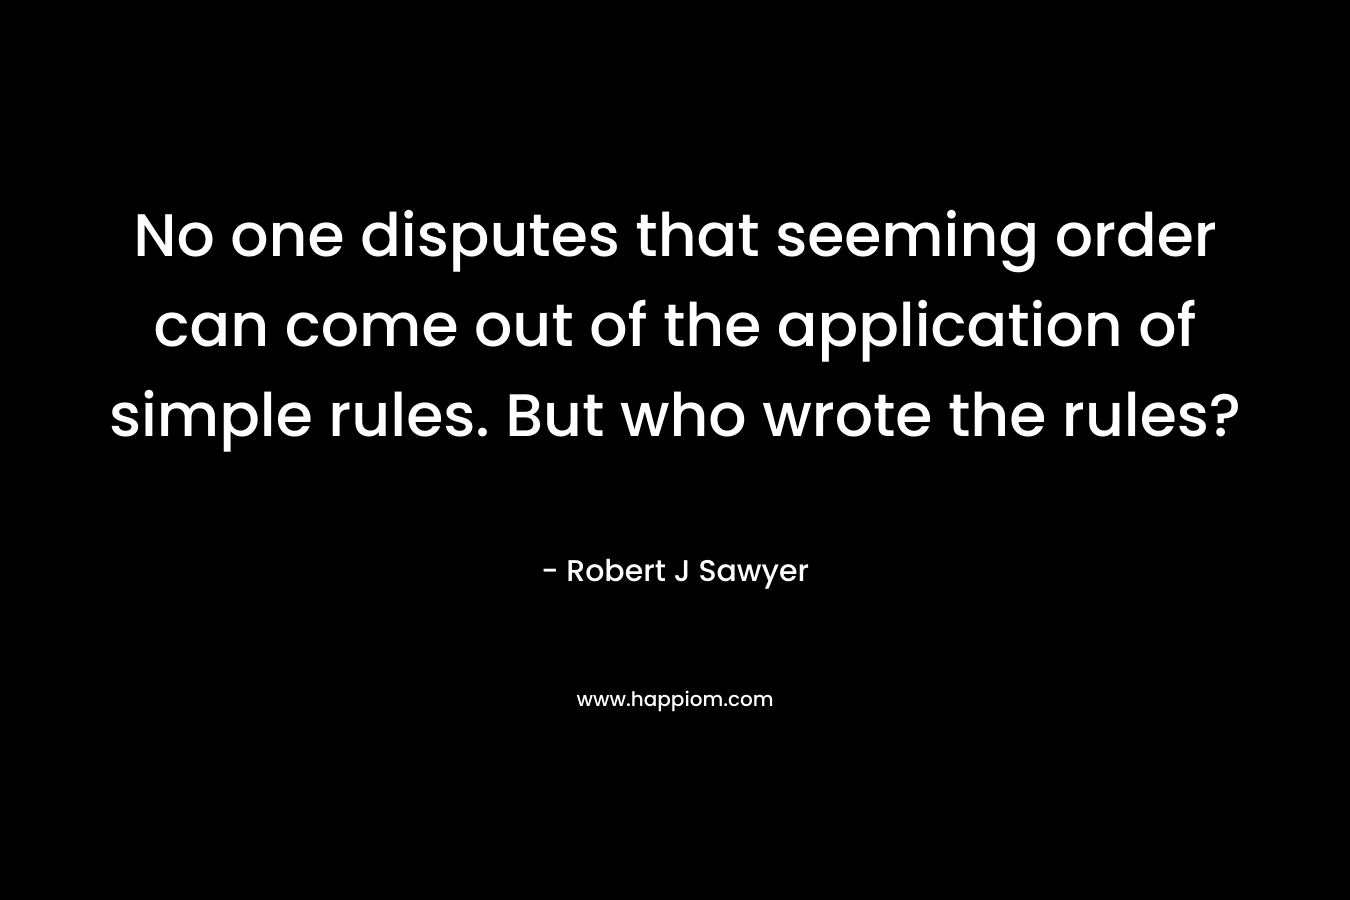 No one disputes that seeming order can come out of the application of simple rules. But who wrote the rules?